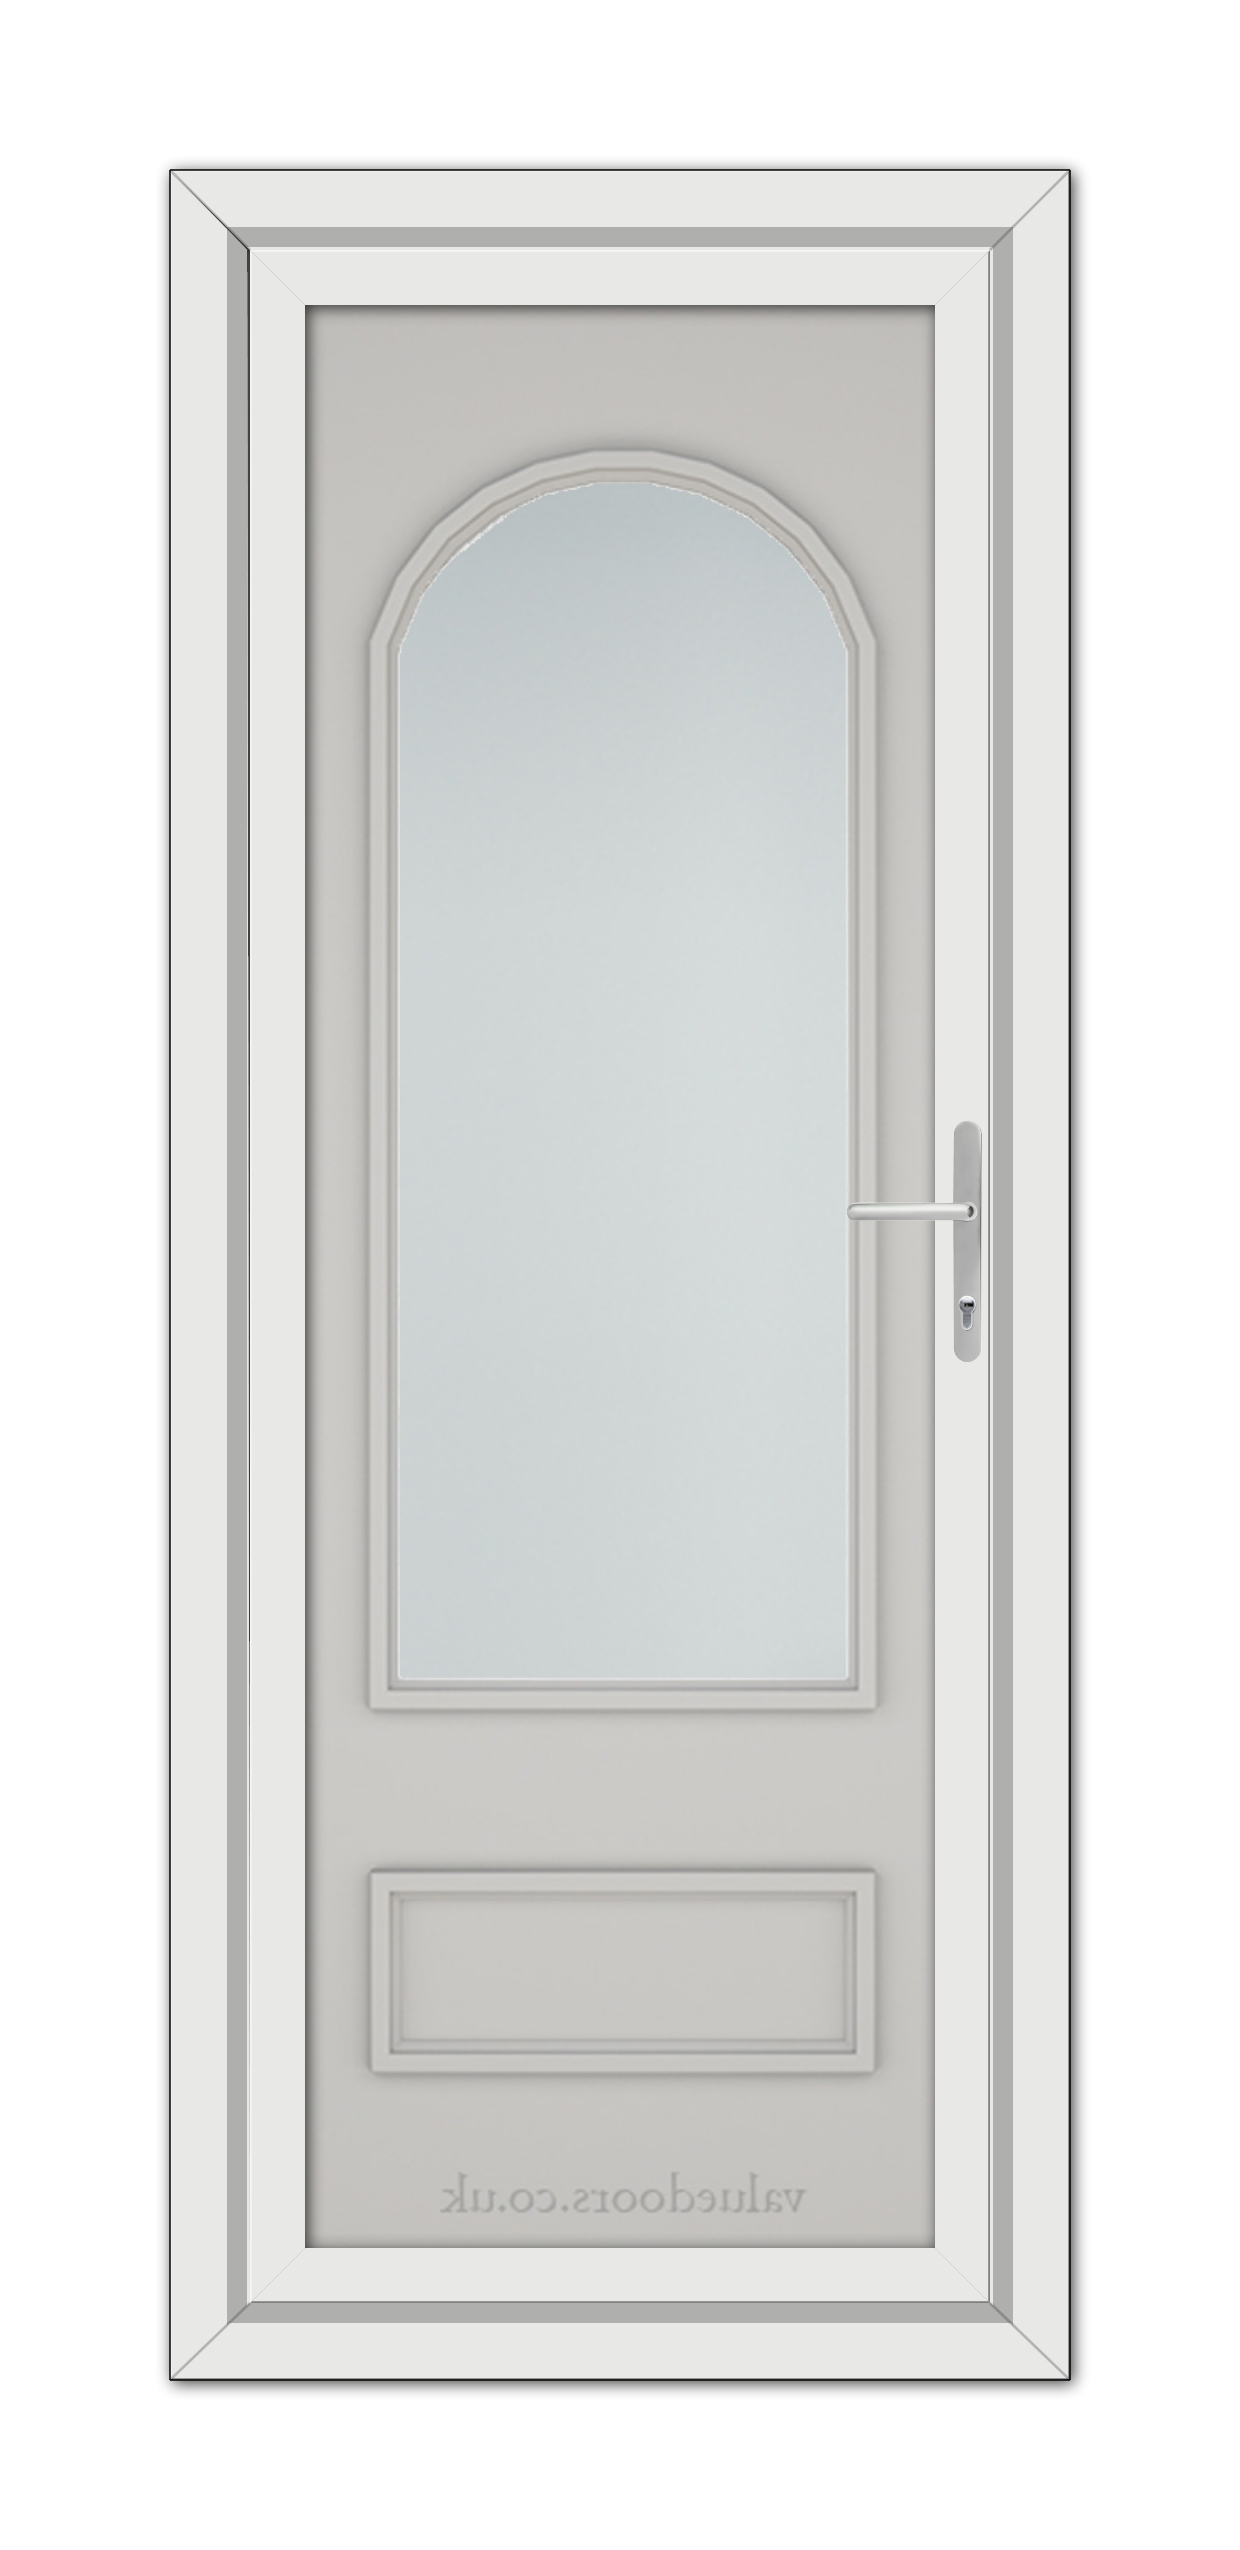 A Silver Grey Canterbury uPVC door with a glass panel.